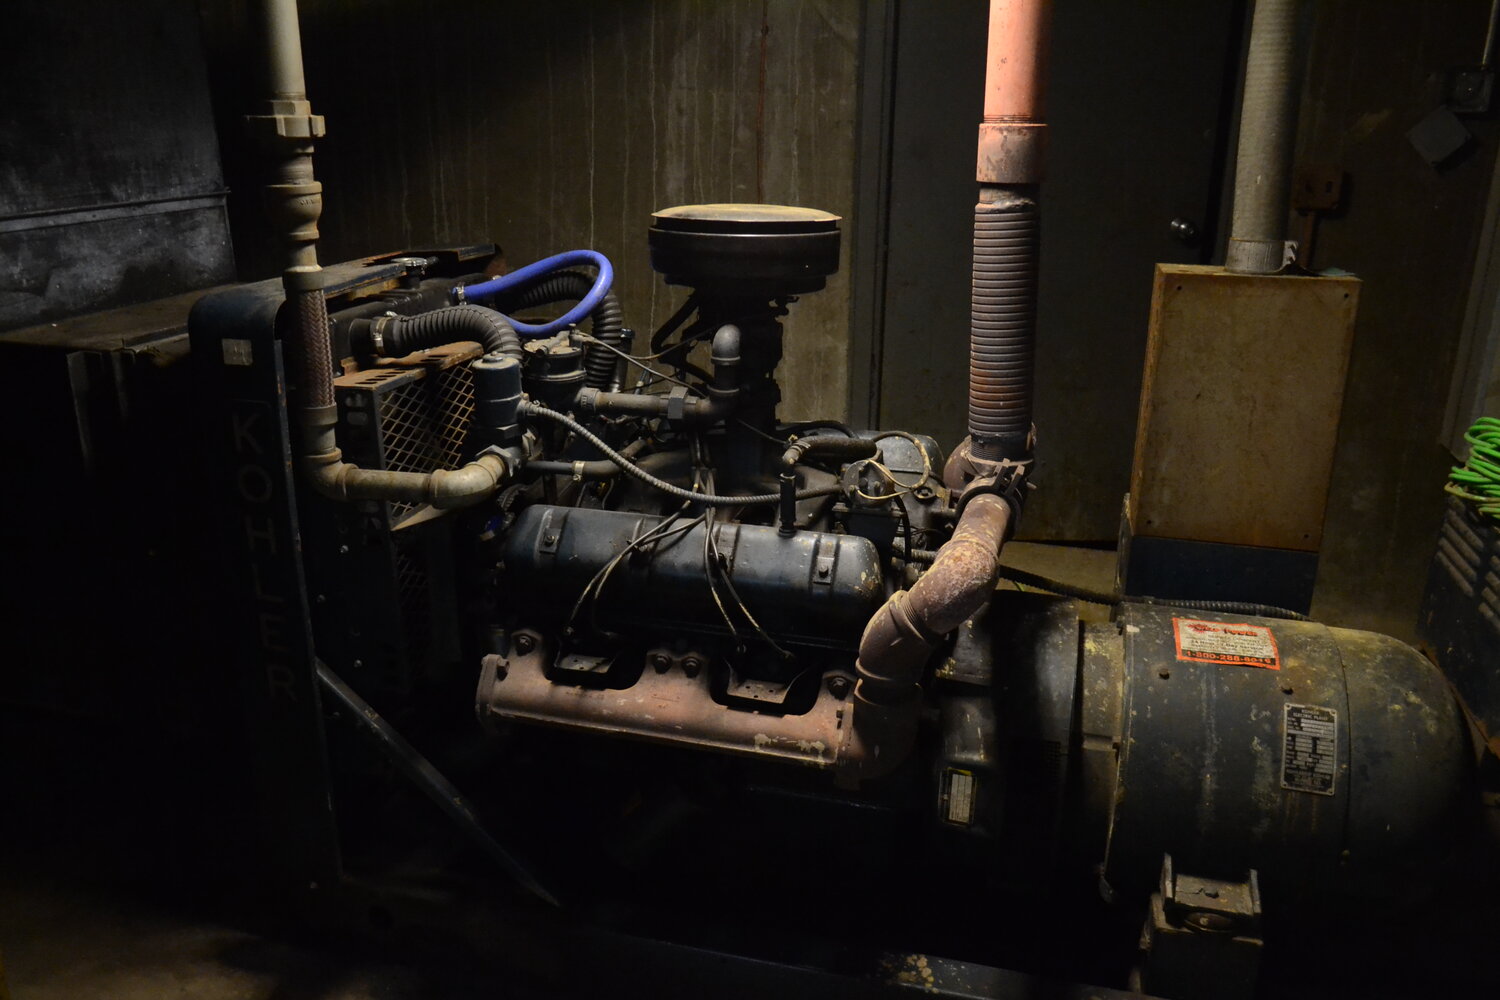 A generator original to the building, which was built in 1965, looks directly out of a Steampunk novel.